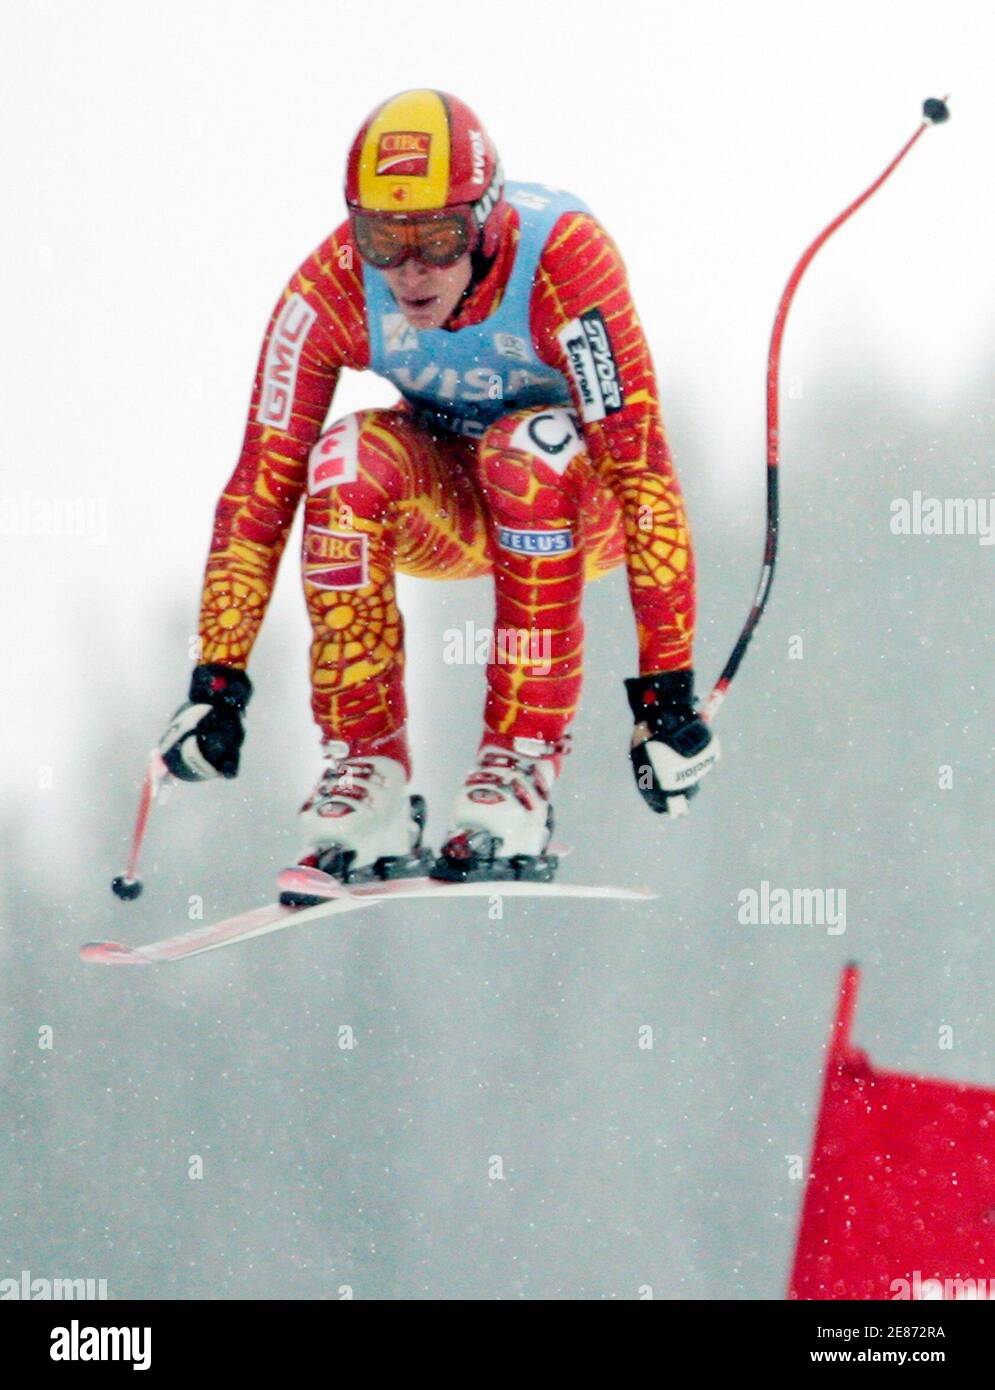 Canadian Erik Guay flies over the last jump on the Birds of Prey course to place sixth in the men's World Cup downhill in Beaver Creek, Colorado December 2, 2005 with a time of one minute 14.46 seconds. Daron Rahlves of the U.S. was first, team mate Bode Miller took second place and Austrian Hans Grugger placed third. REUTERS/Rick Wilking Stock Photo